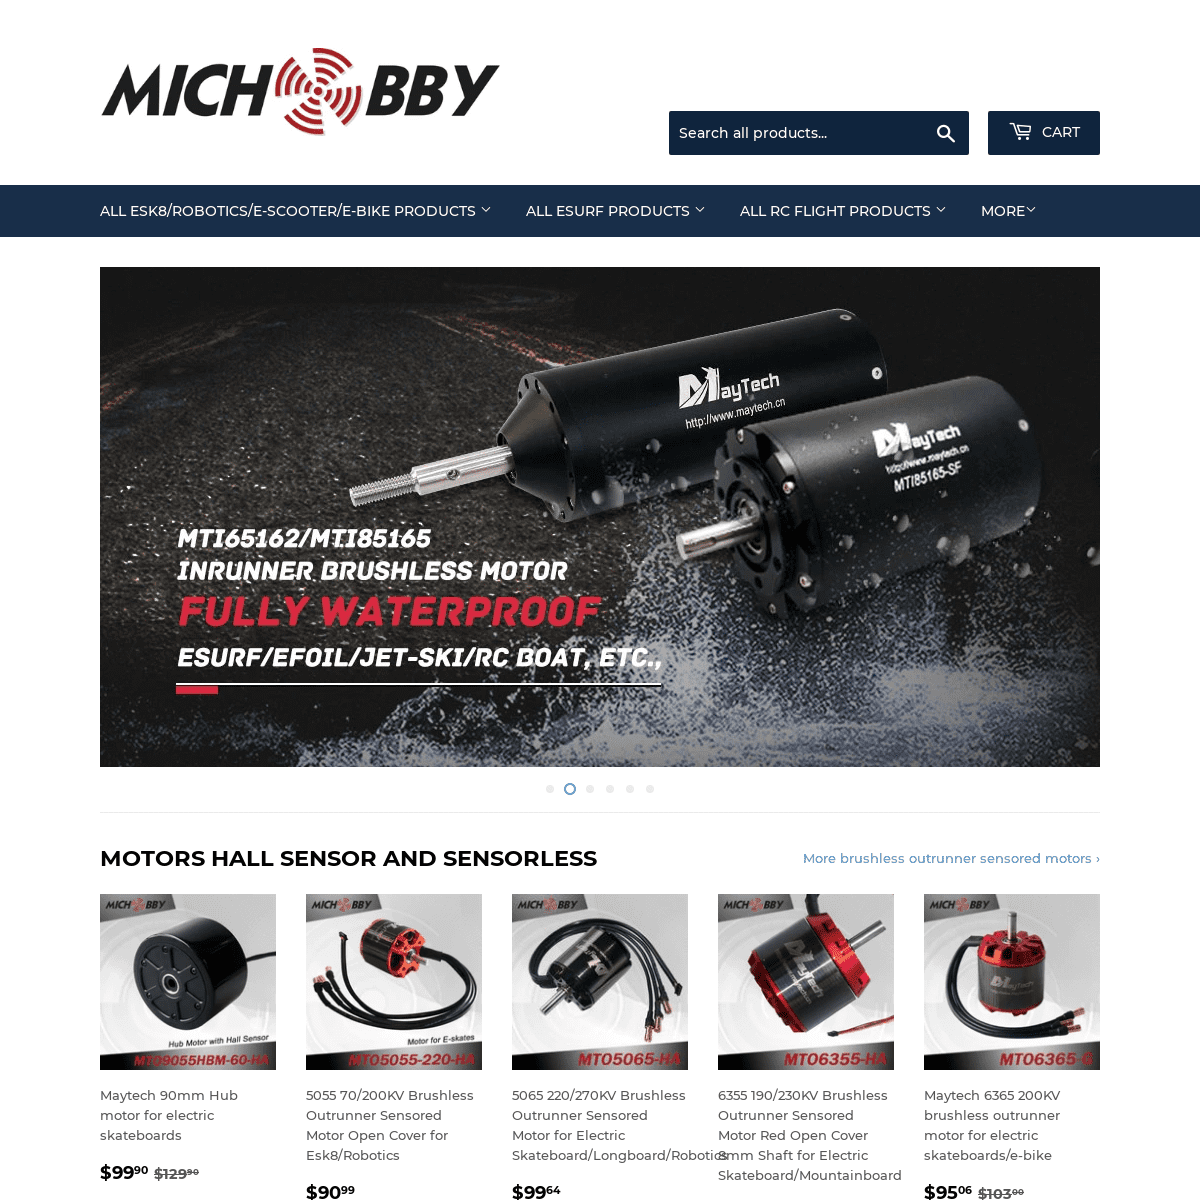 A complete backup of michobby.com